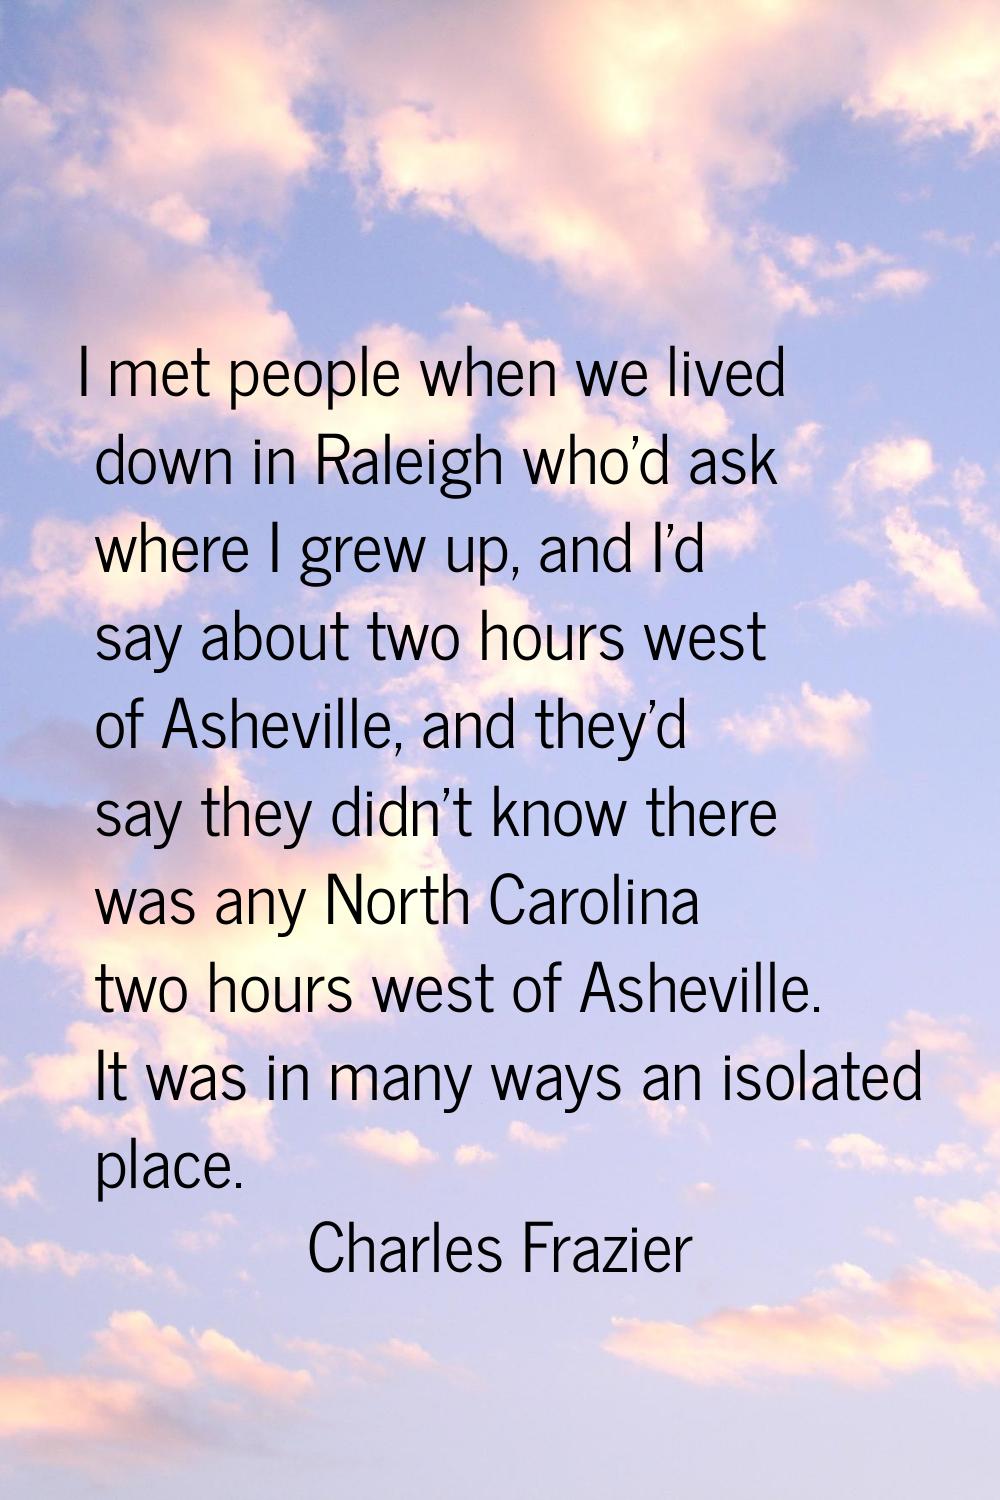 I met people when we lived down in Raleigh who'd ask where I grew up, and I'd say about two hours w